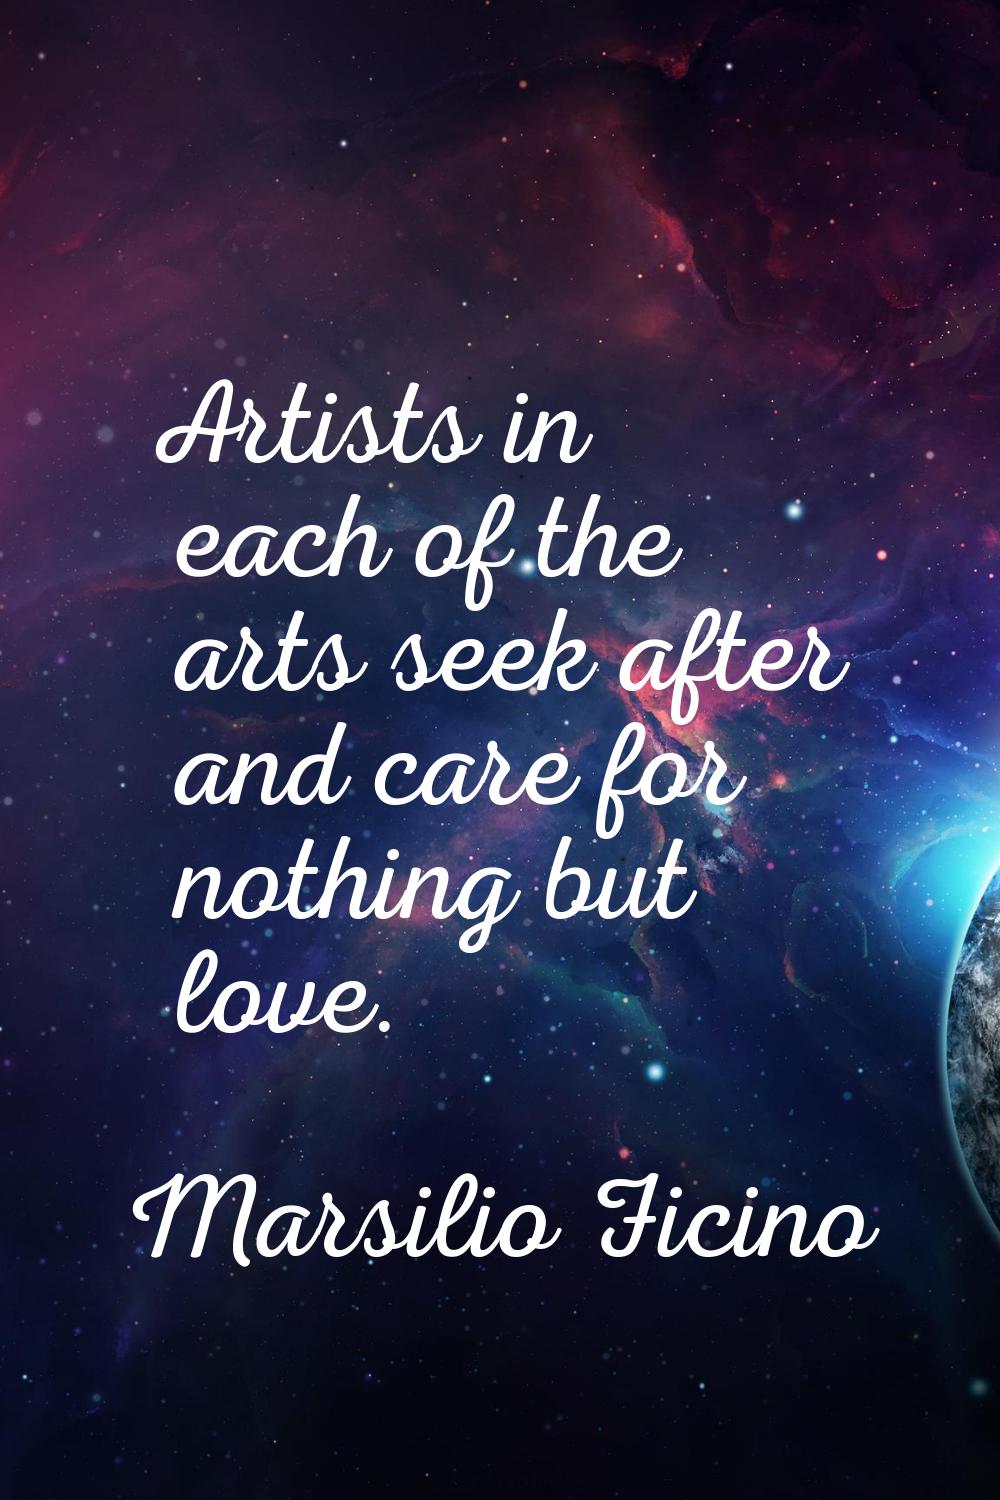 Artists in each of the arts seek after and care for nothing but love.